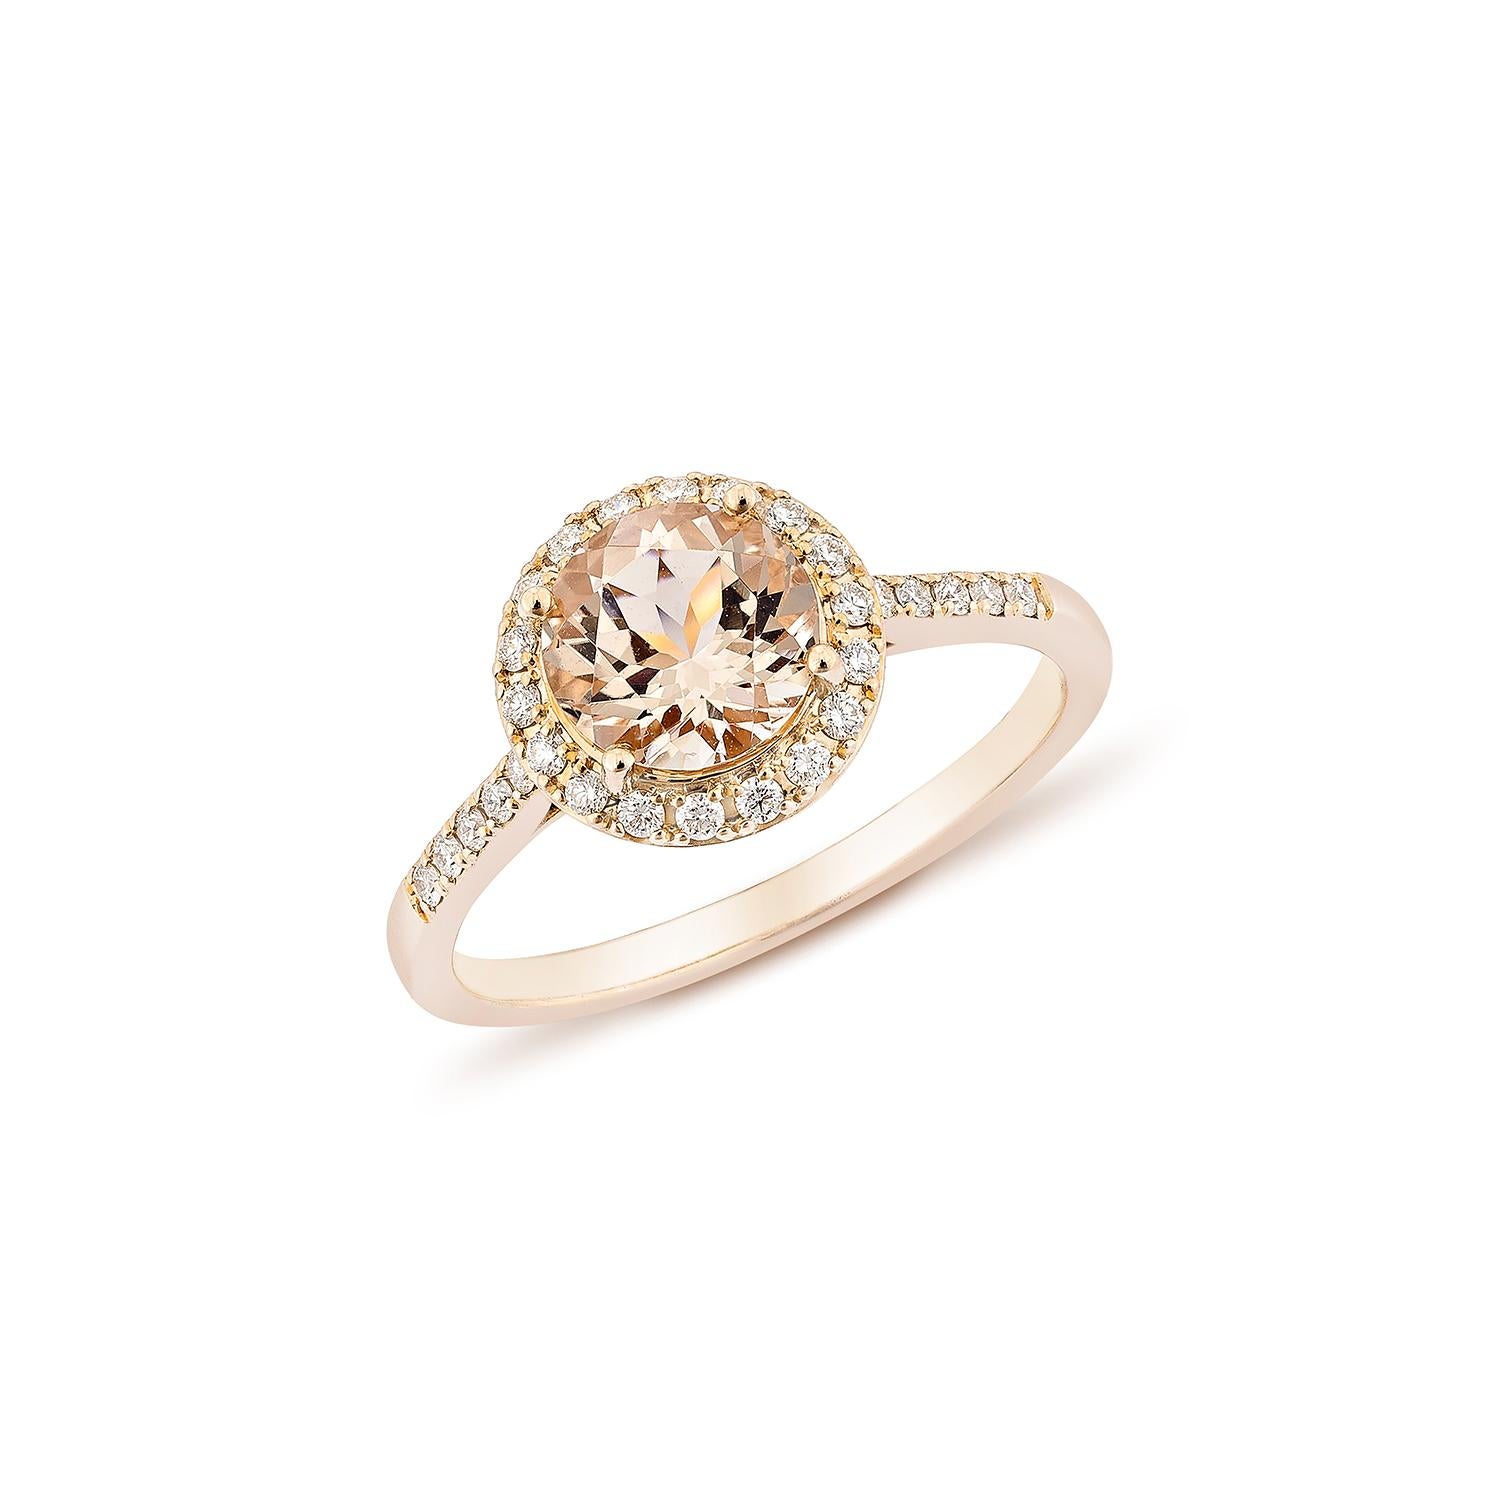 Contemporary 1.10 Carat Morganite Fancy Ring in 14Karat Rose Gold with White Diamond.    For Sale